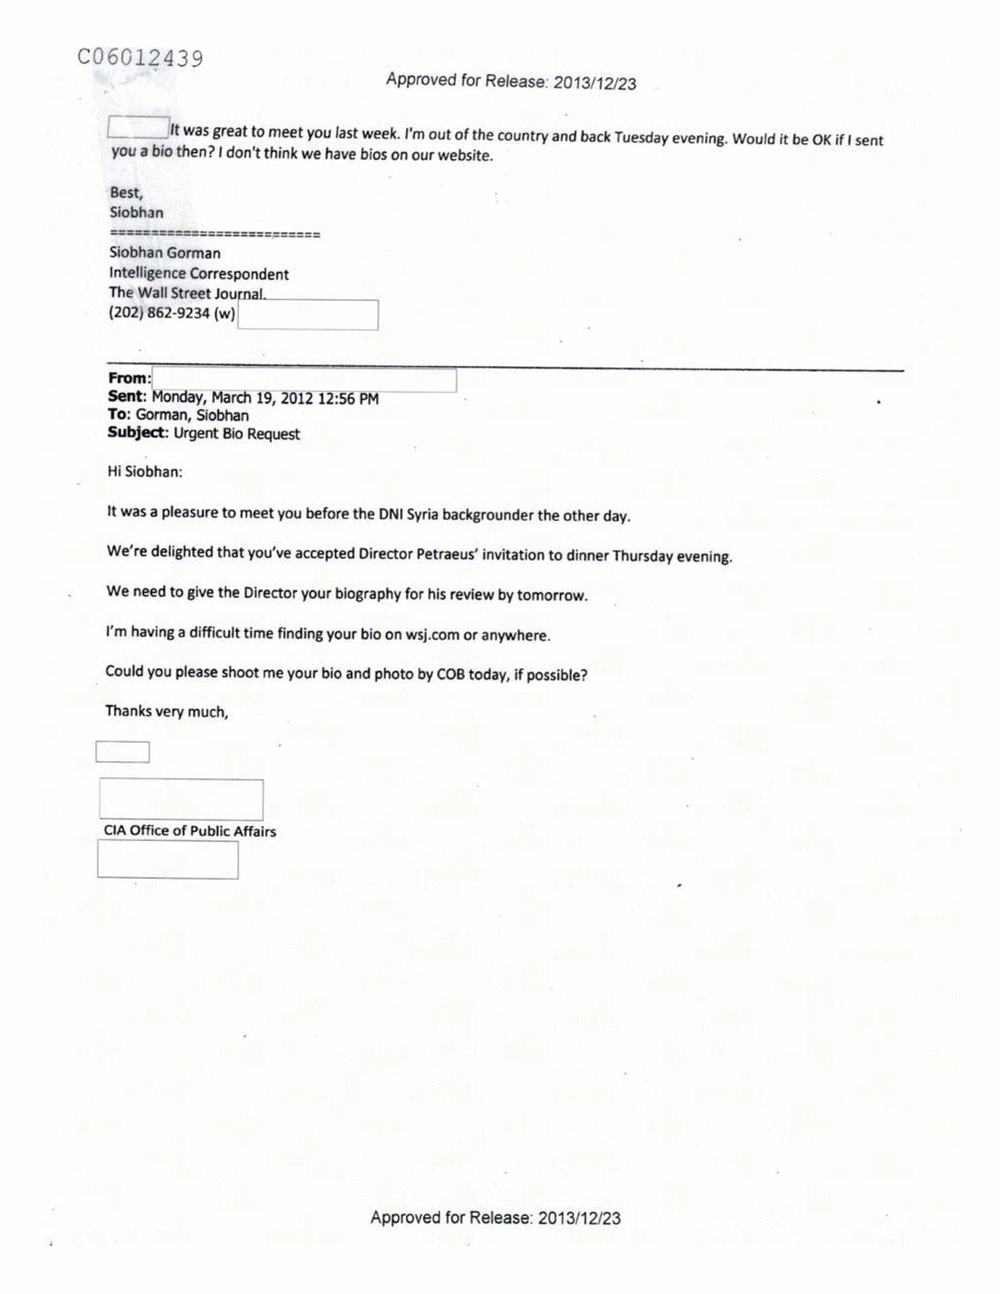 Page 23 from Email Correspondence Between Reporters and CIA Flacks